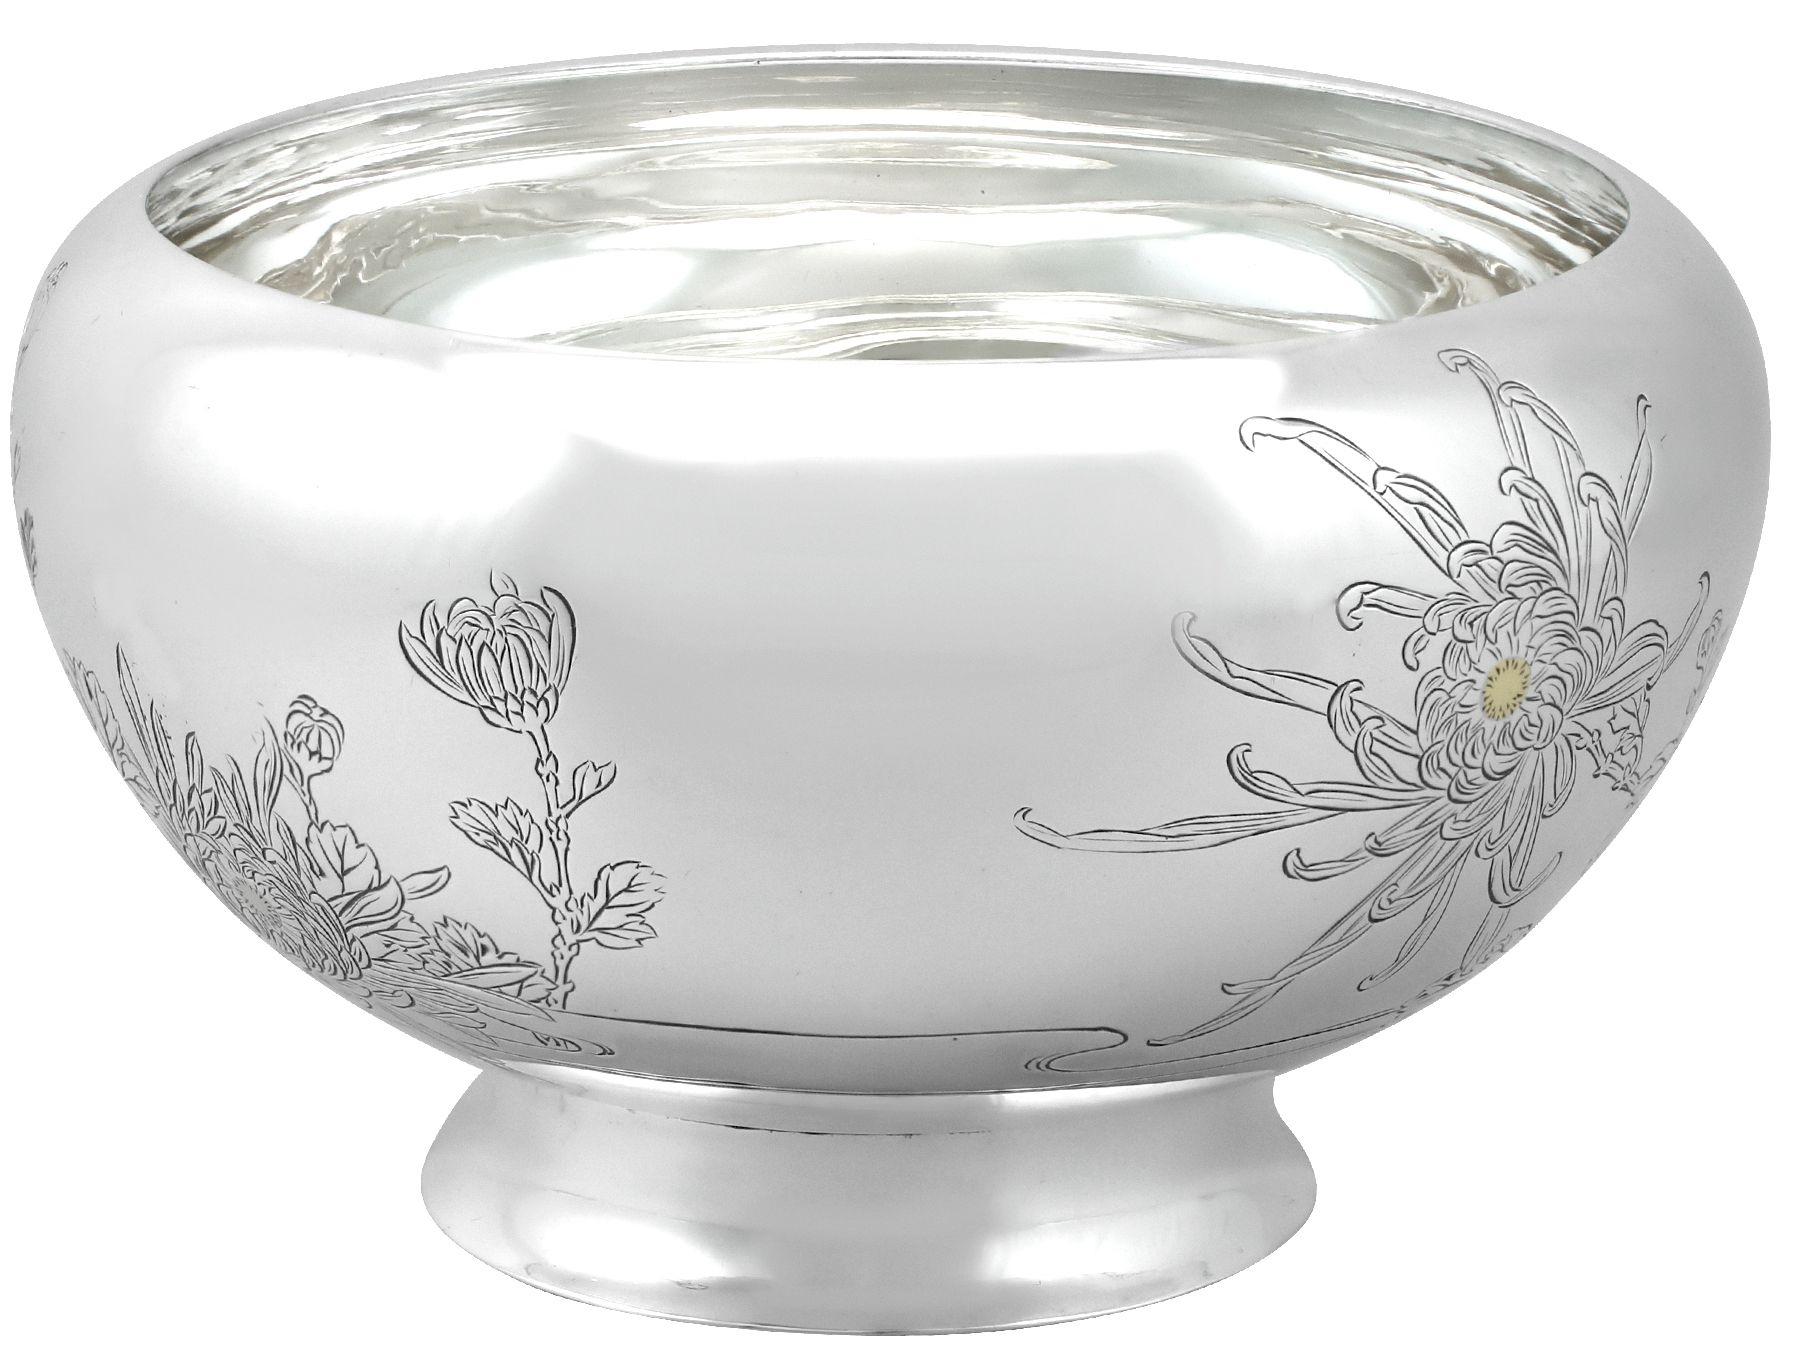 An exceptional, fine and impressive antique Japanese silver serving bowl; an addition to our Asian silverware collection. 

This exceptional Japanese silver serving bowl has a plain circular rounded form onto a plain circular swept, spreading